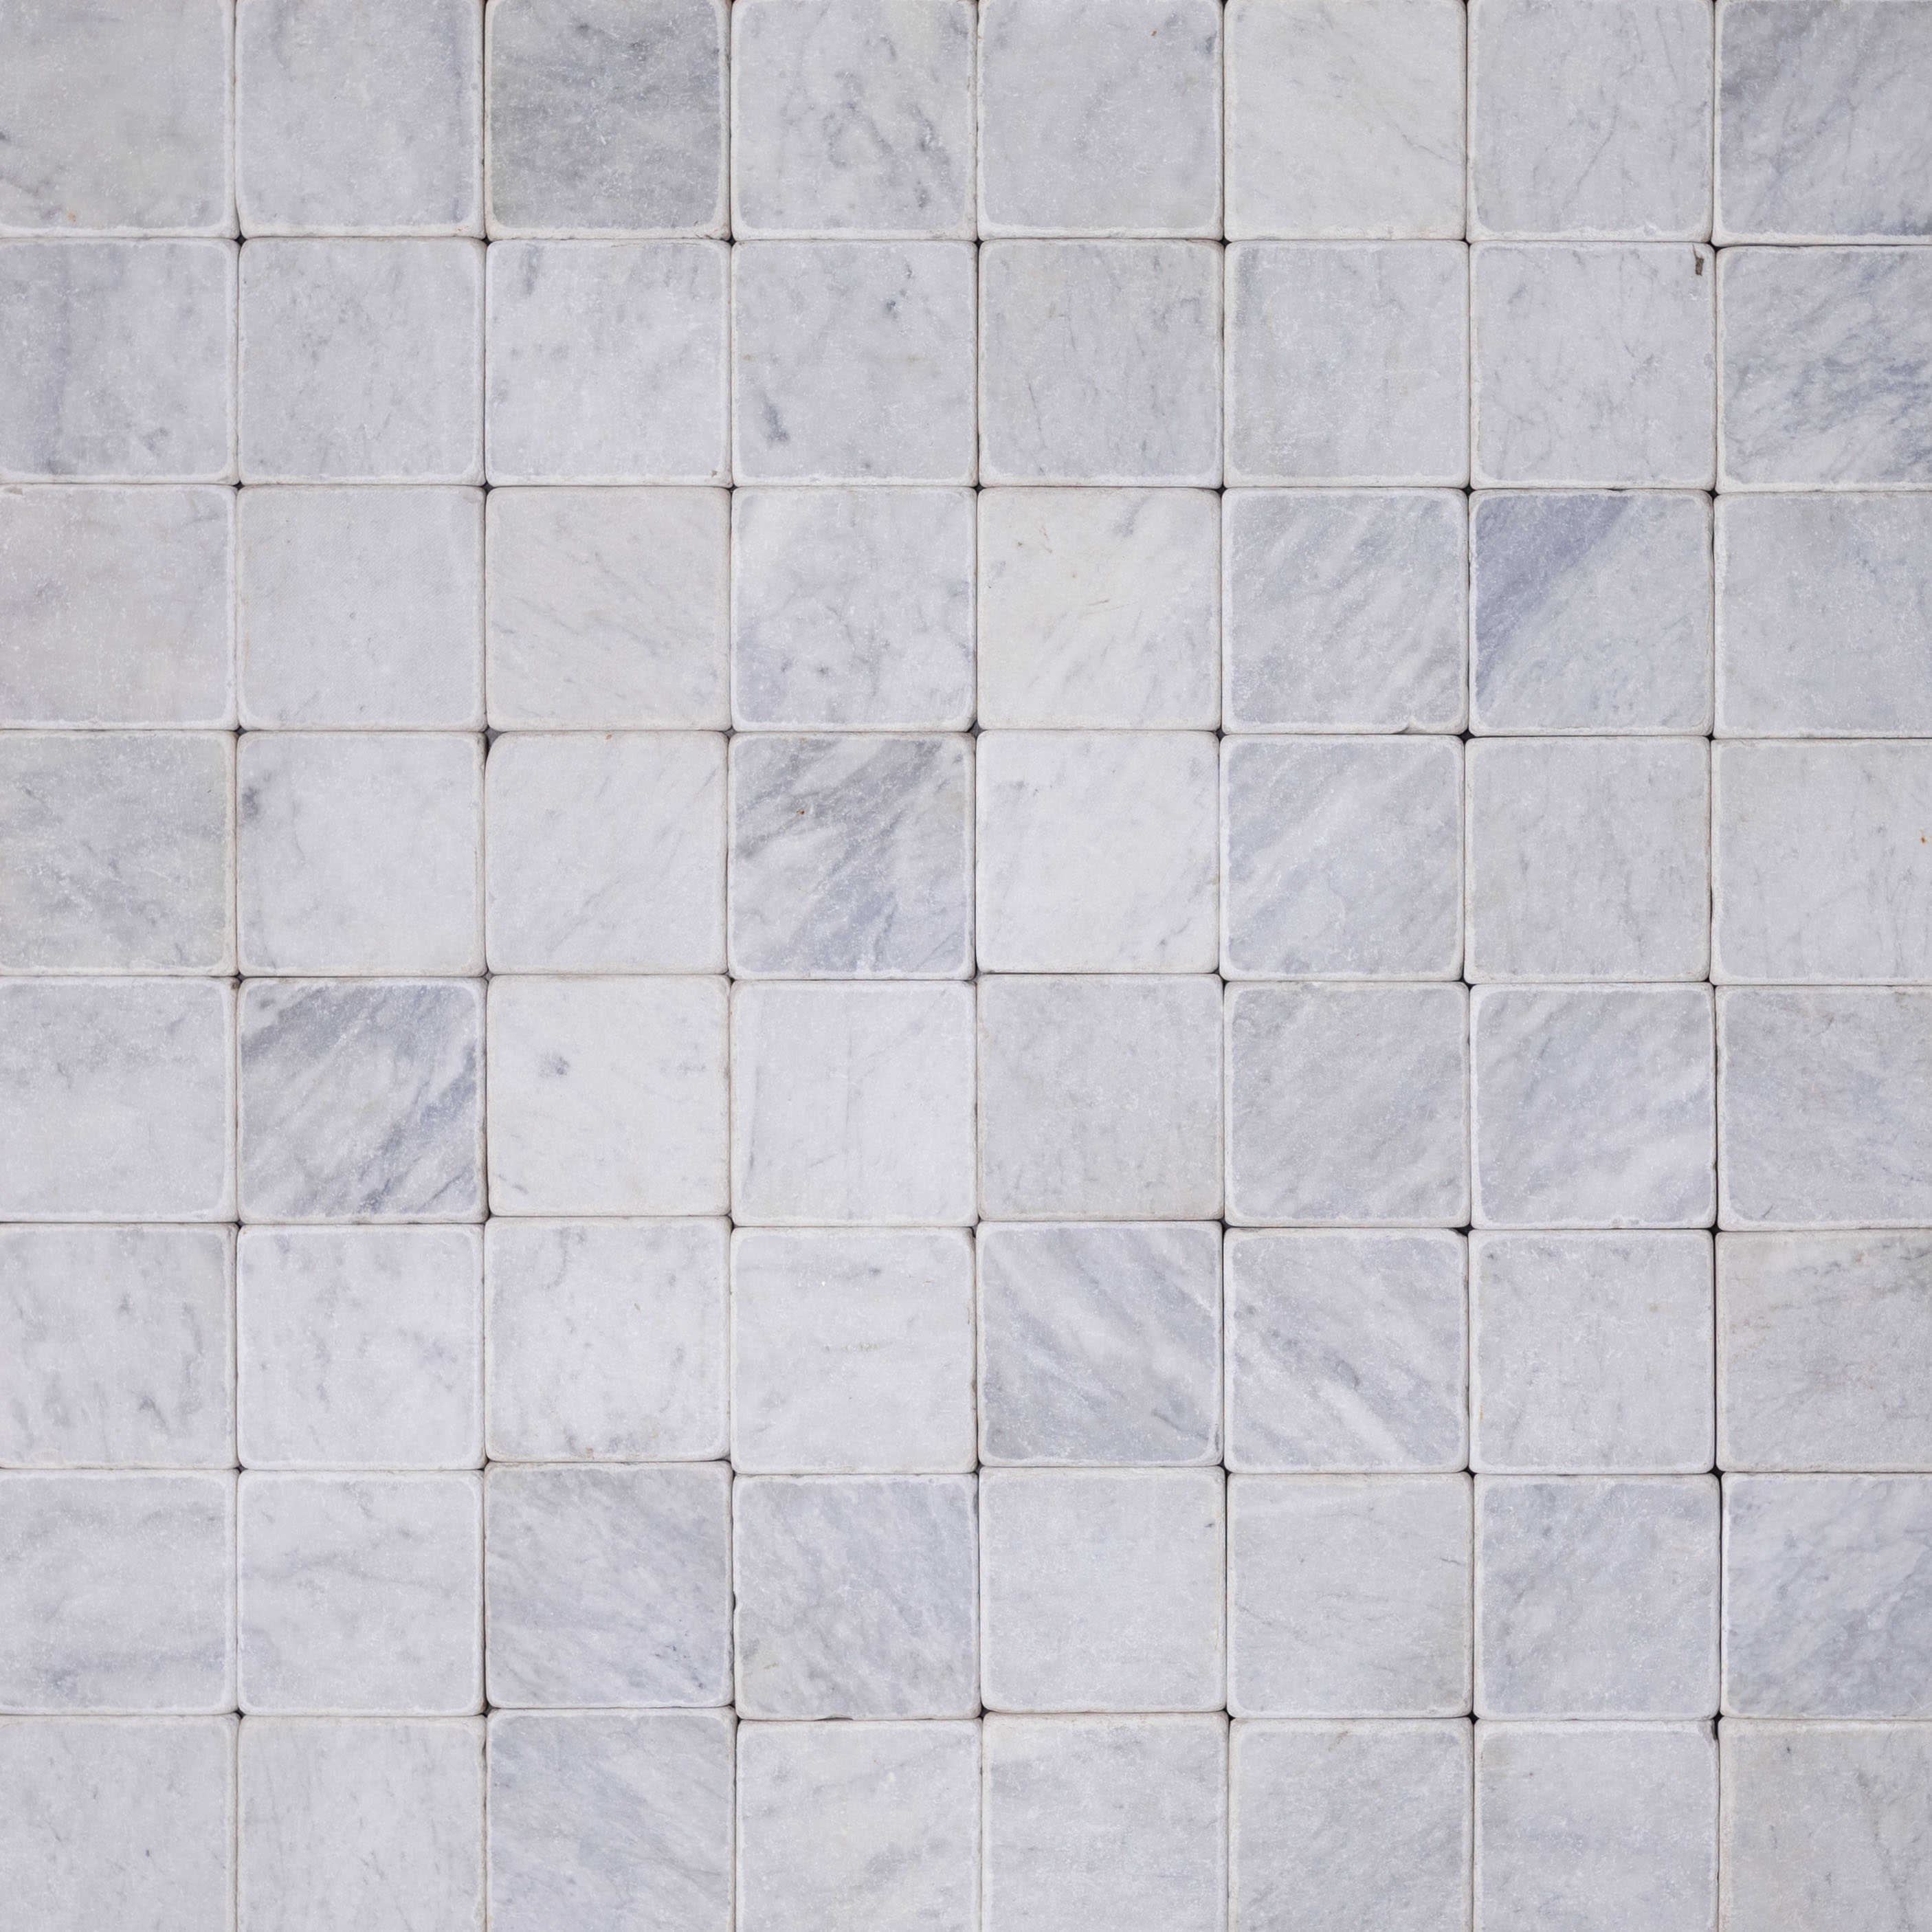 GatherCo Bianco Finish Marble SpecialtyTiles HonedTumbled-2